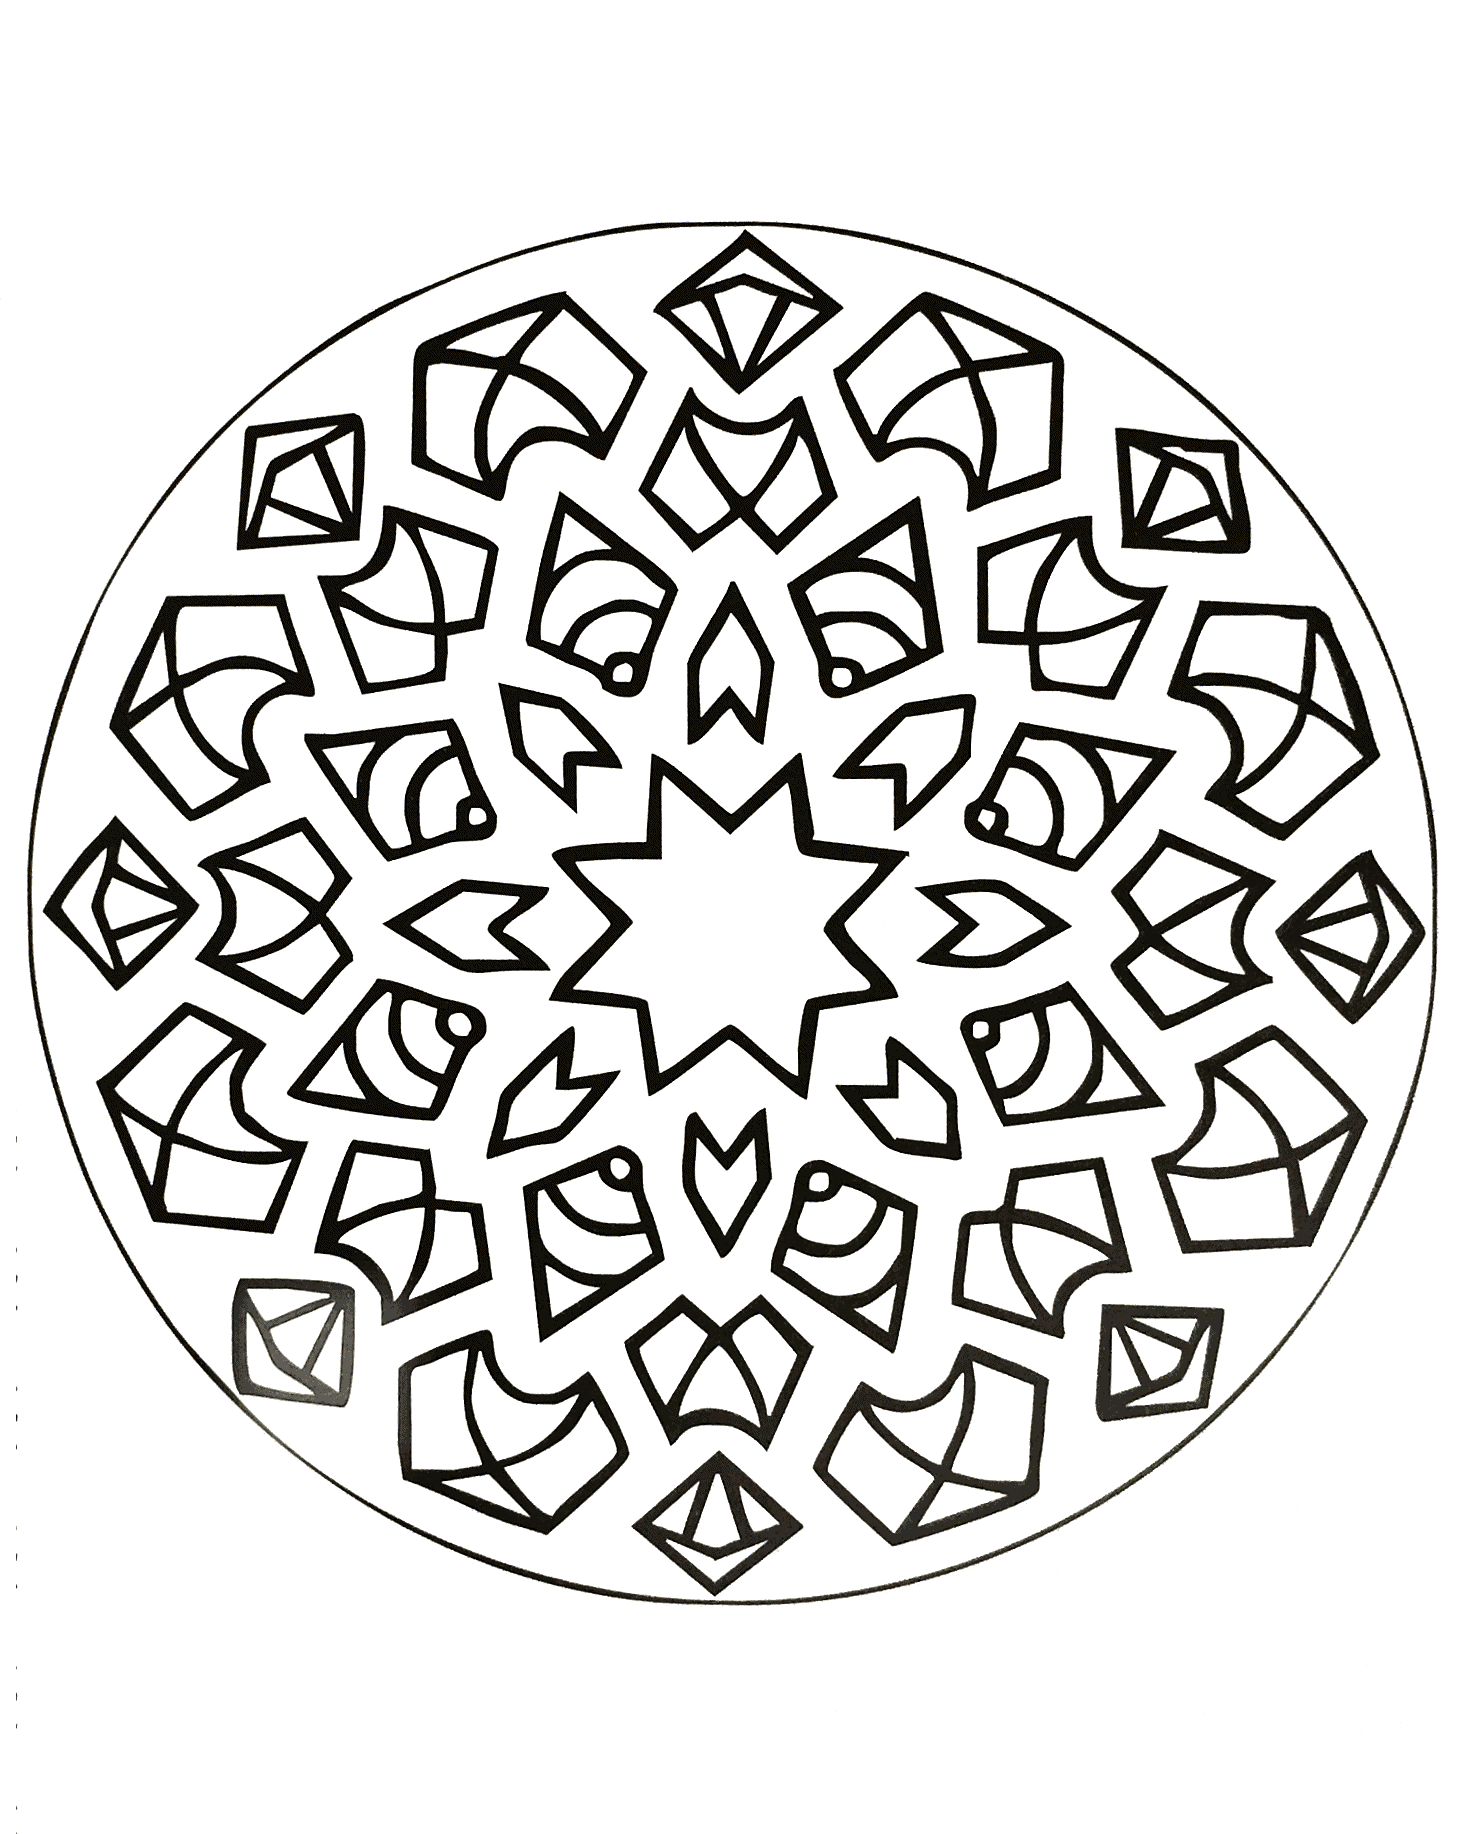 Prepare your pencils and pens to color this incredible Mandala coloring page with little details. It can sometimes be even more relaxing when coloring and passively listening to music : don't hesitate to do it !